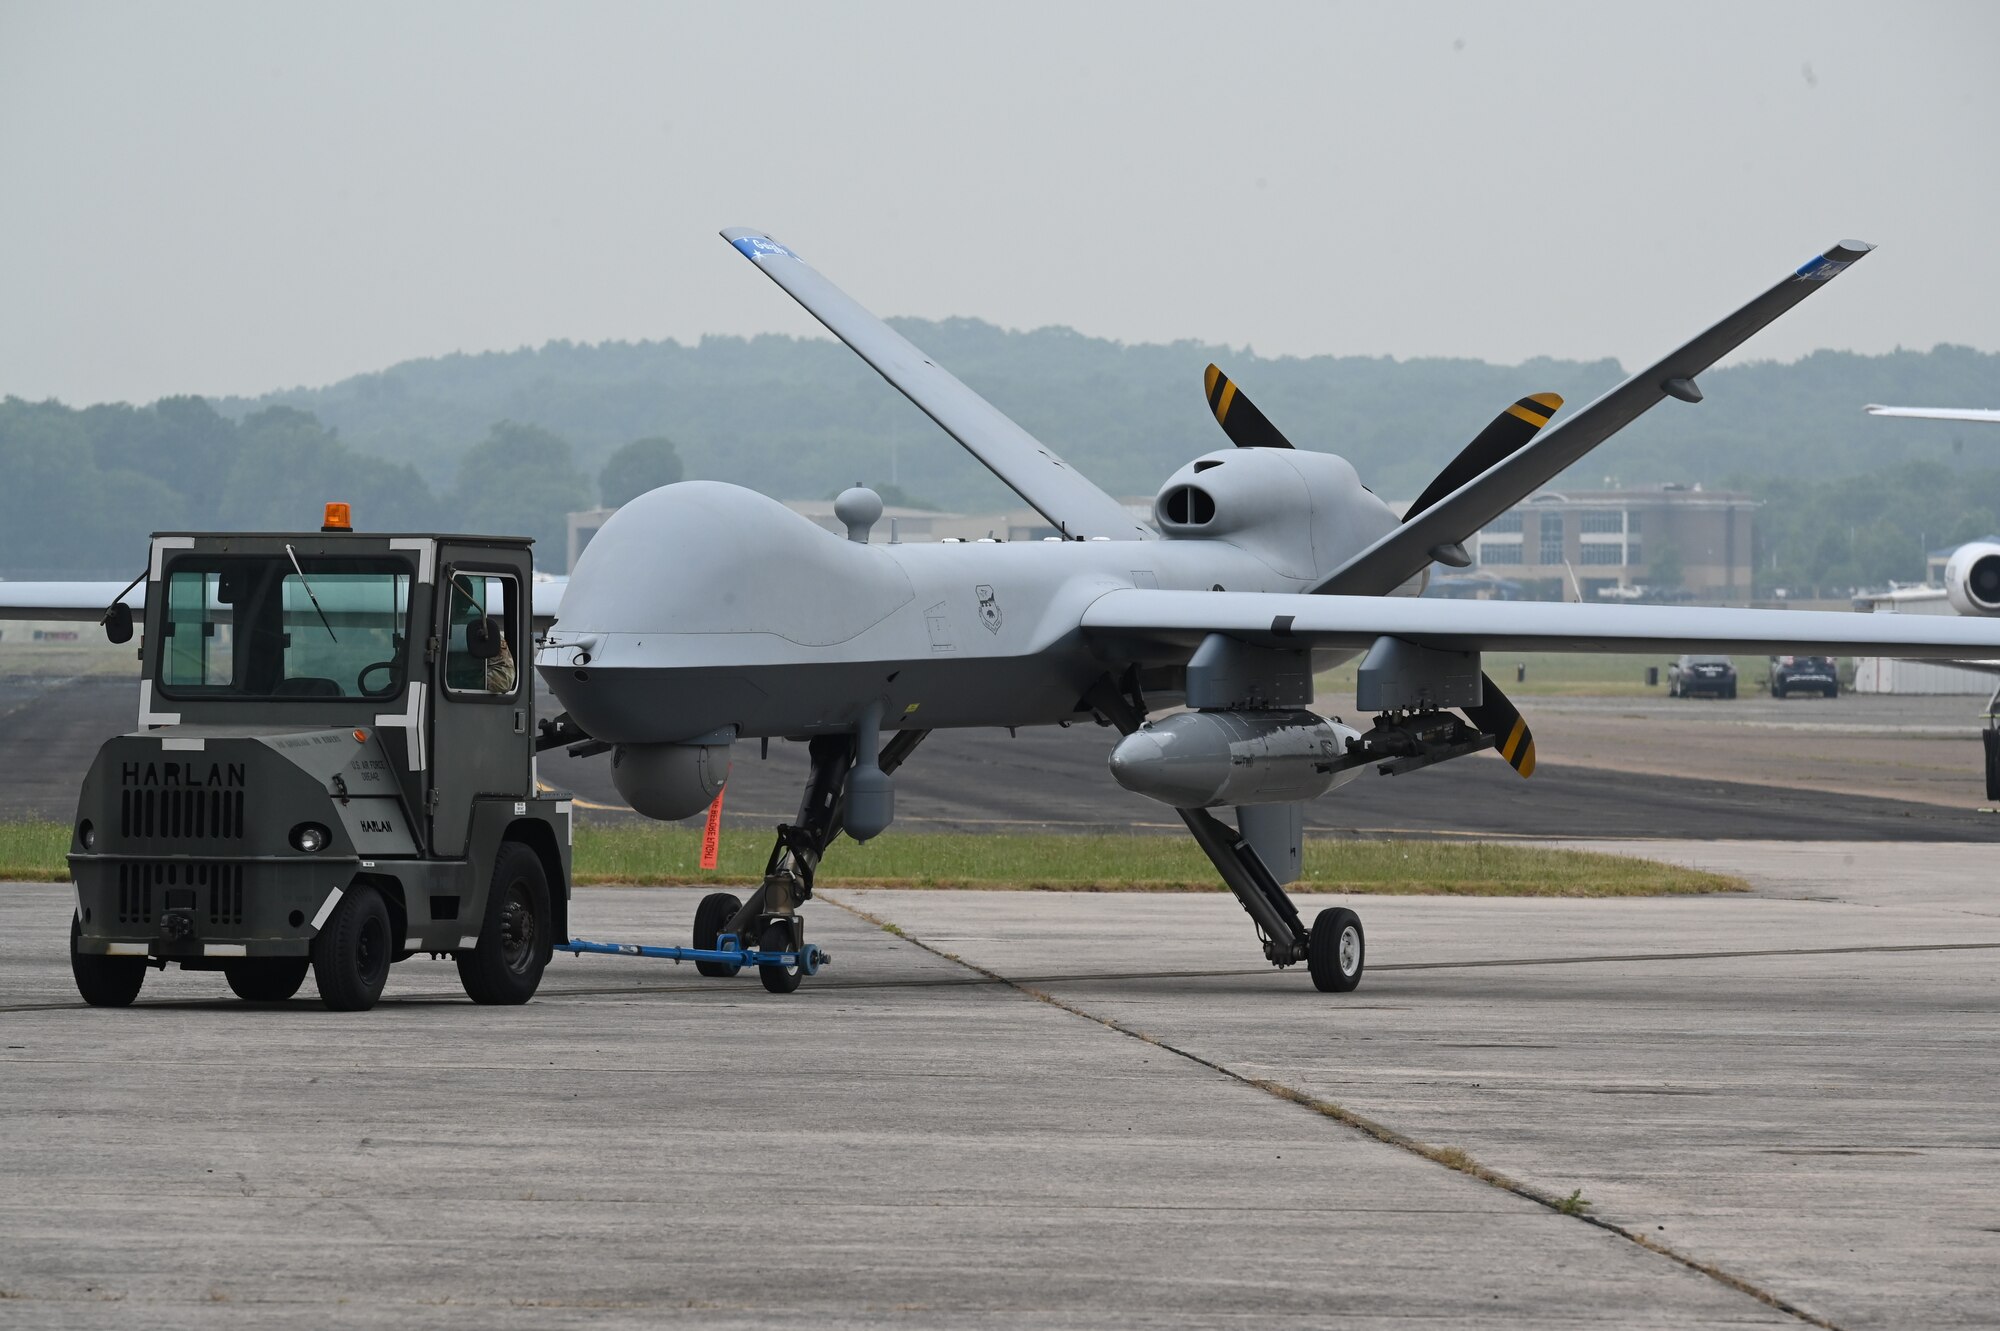 A MQ-9 Reaper lands in Tennessee for the first time in state history June 7, 2023 in Smyrna, Tennessee. The MQ-9, owned by the 163d Attack Wing of the California Air National Guard, is being flown by 118th Wing pilots of the Tennessee Air National Guard for the Whiskey Fury 2023 exercise June 12-16, 2023. (U.S. Air National Guard photo by Tech. Sgt. Anthony Agosti)